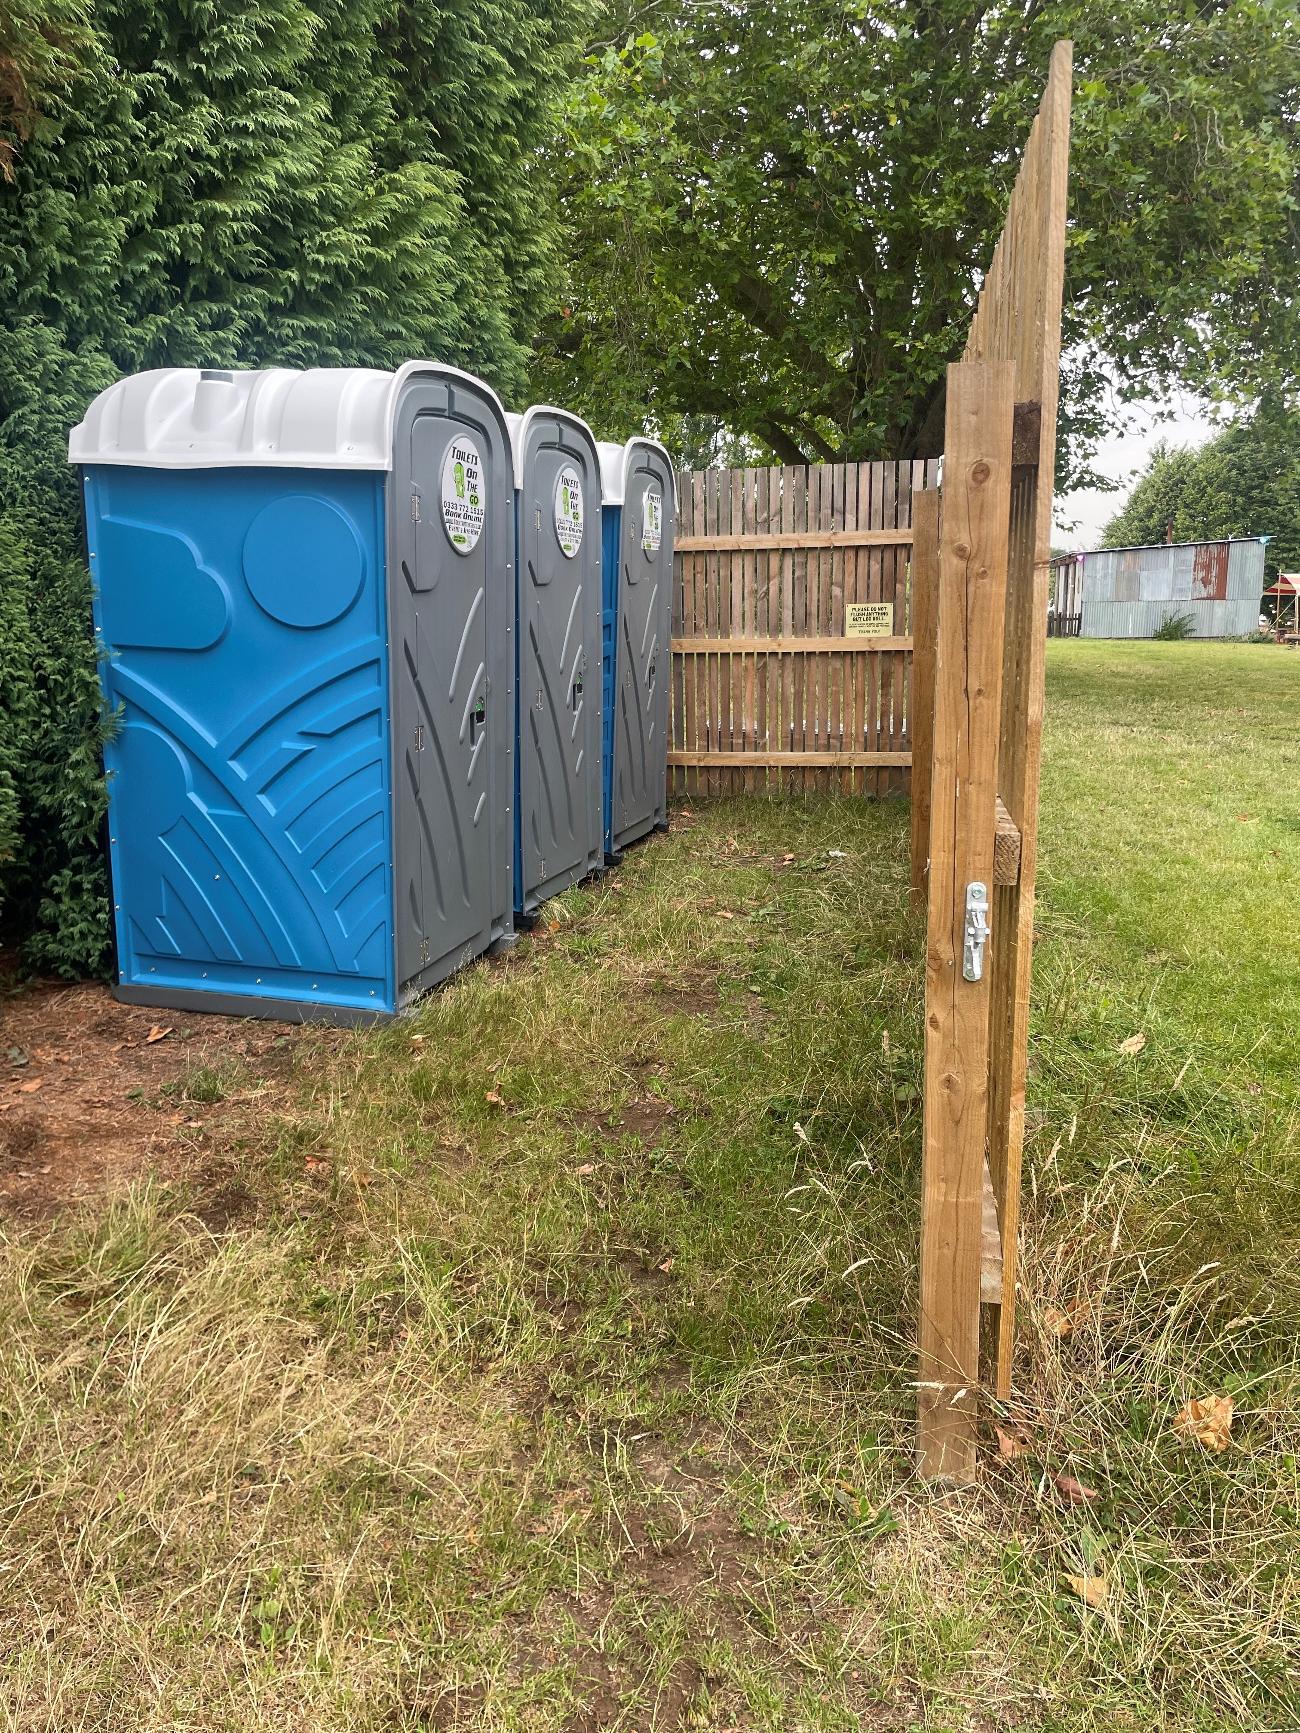 Gallery | Portable Toilet Loo Hire Rental Company in North West uk and Manchester gallery image 28